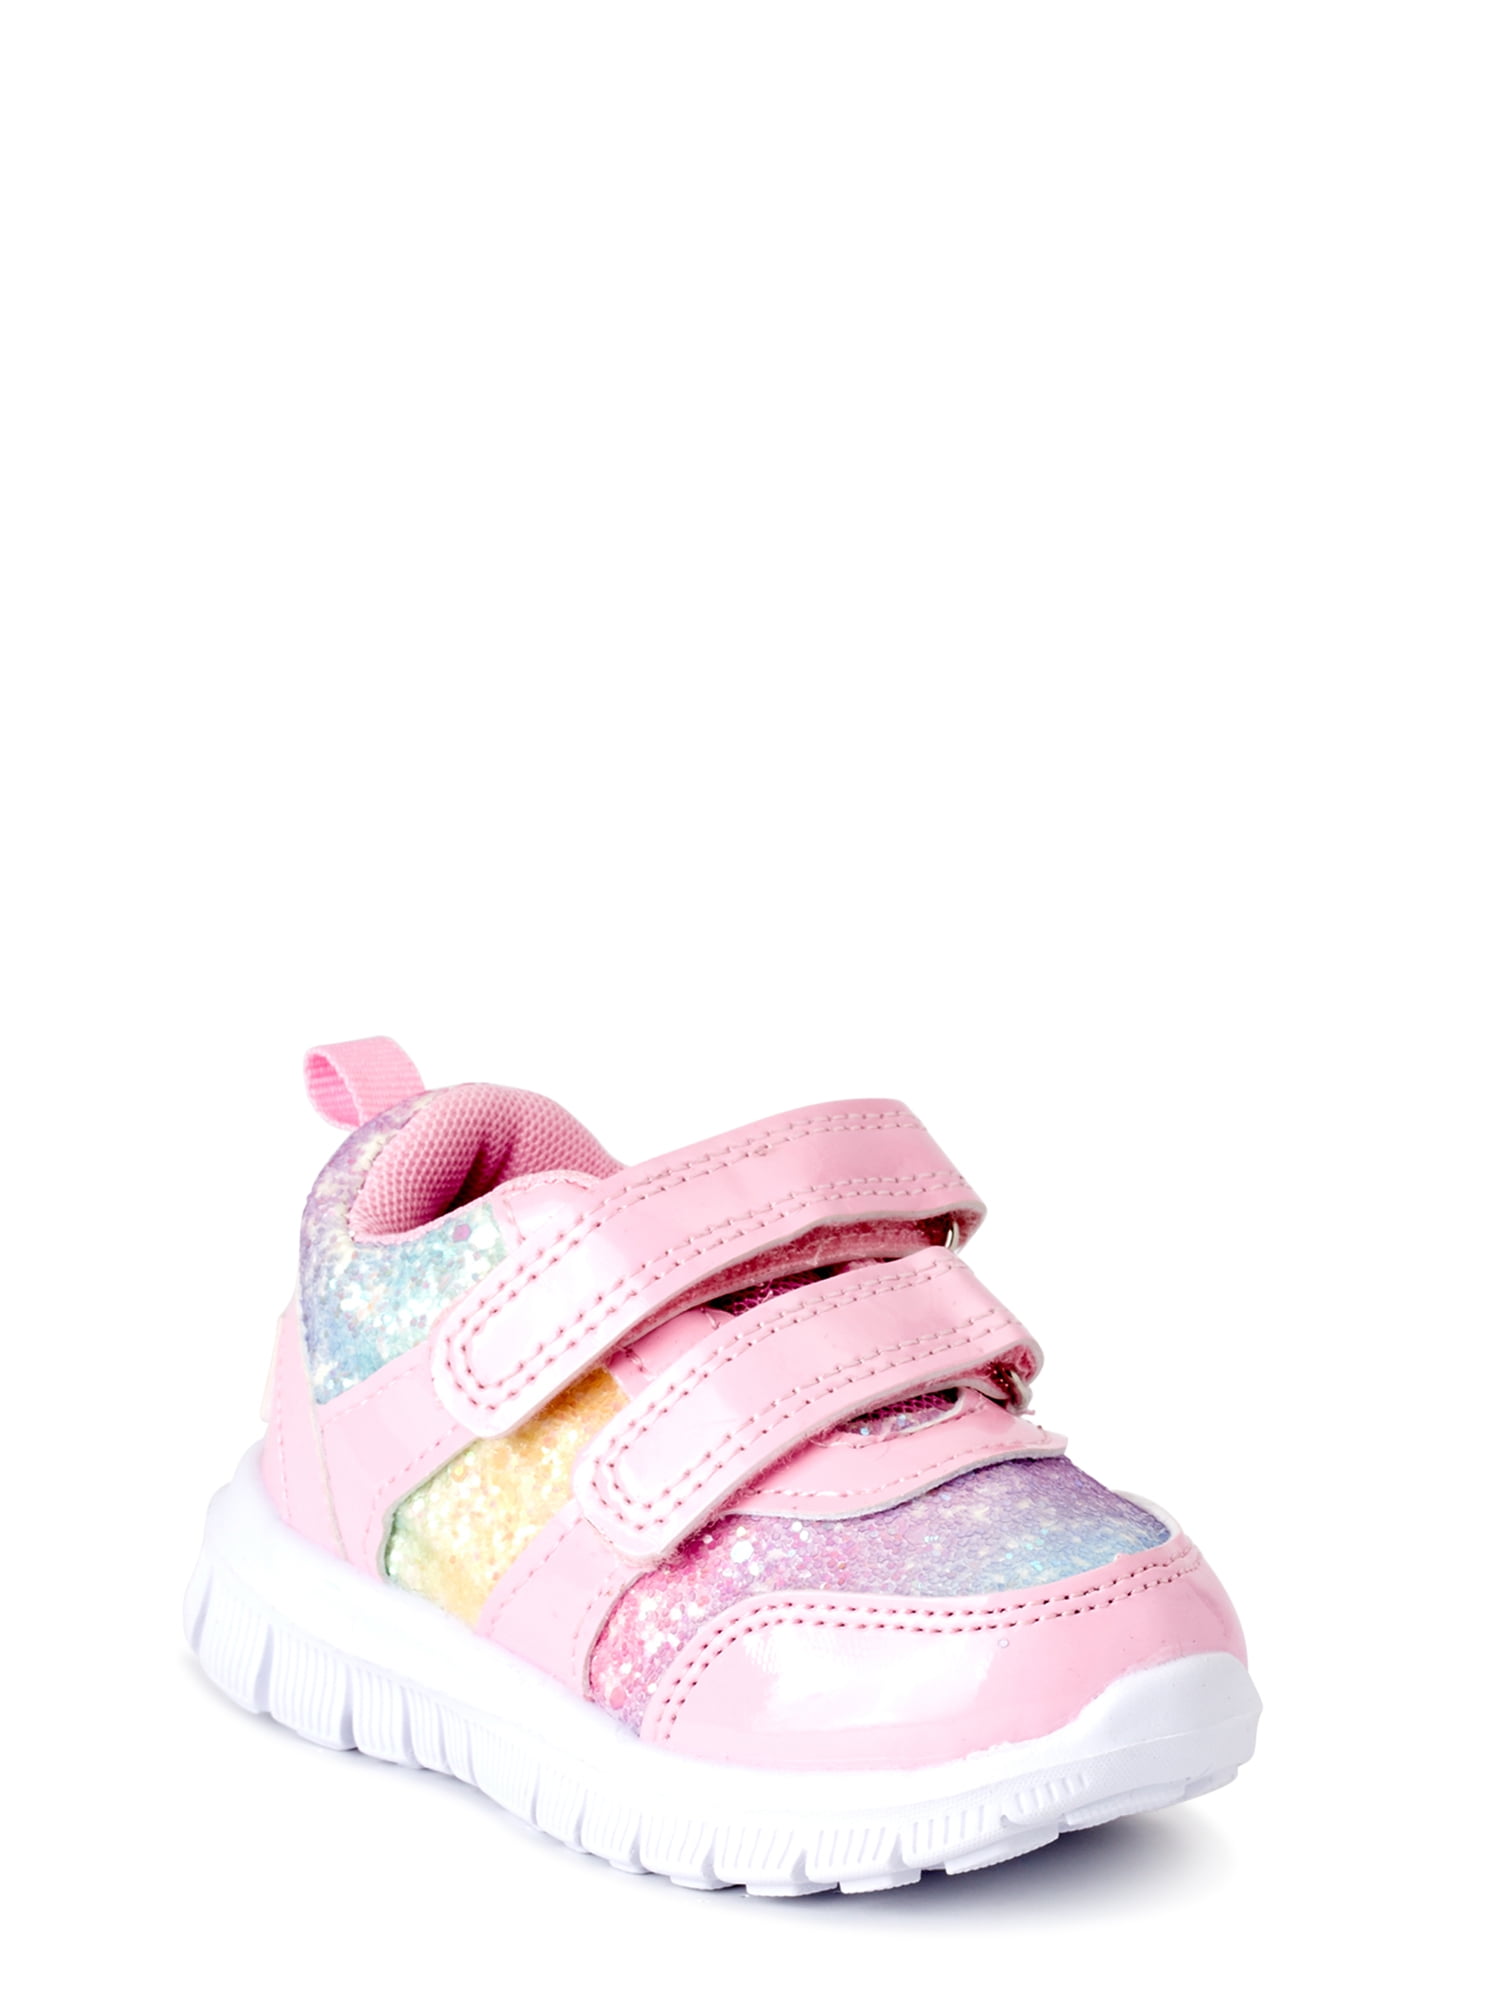 one year old baby girl sandals